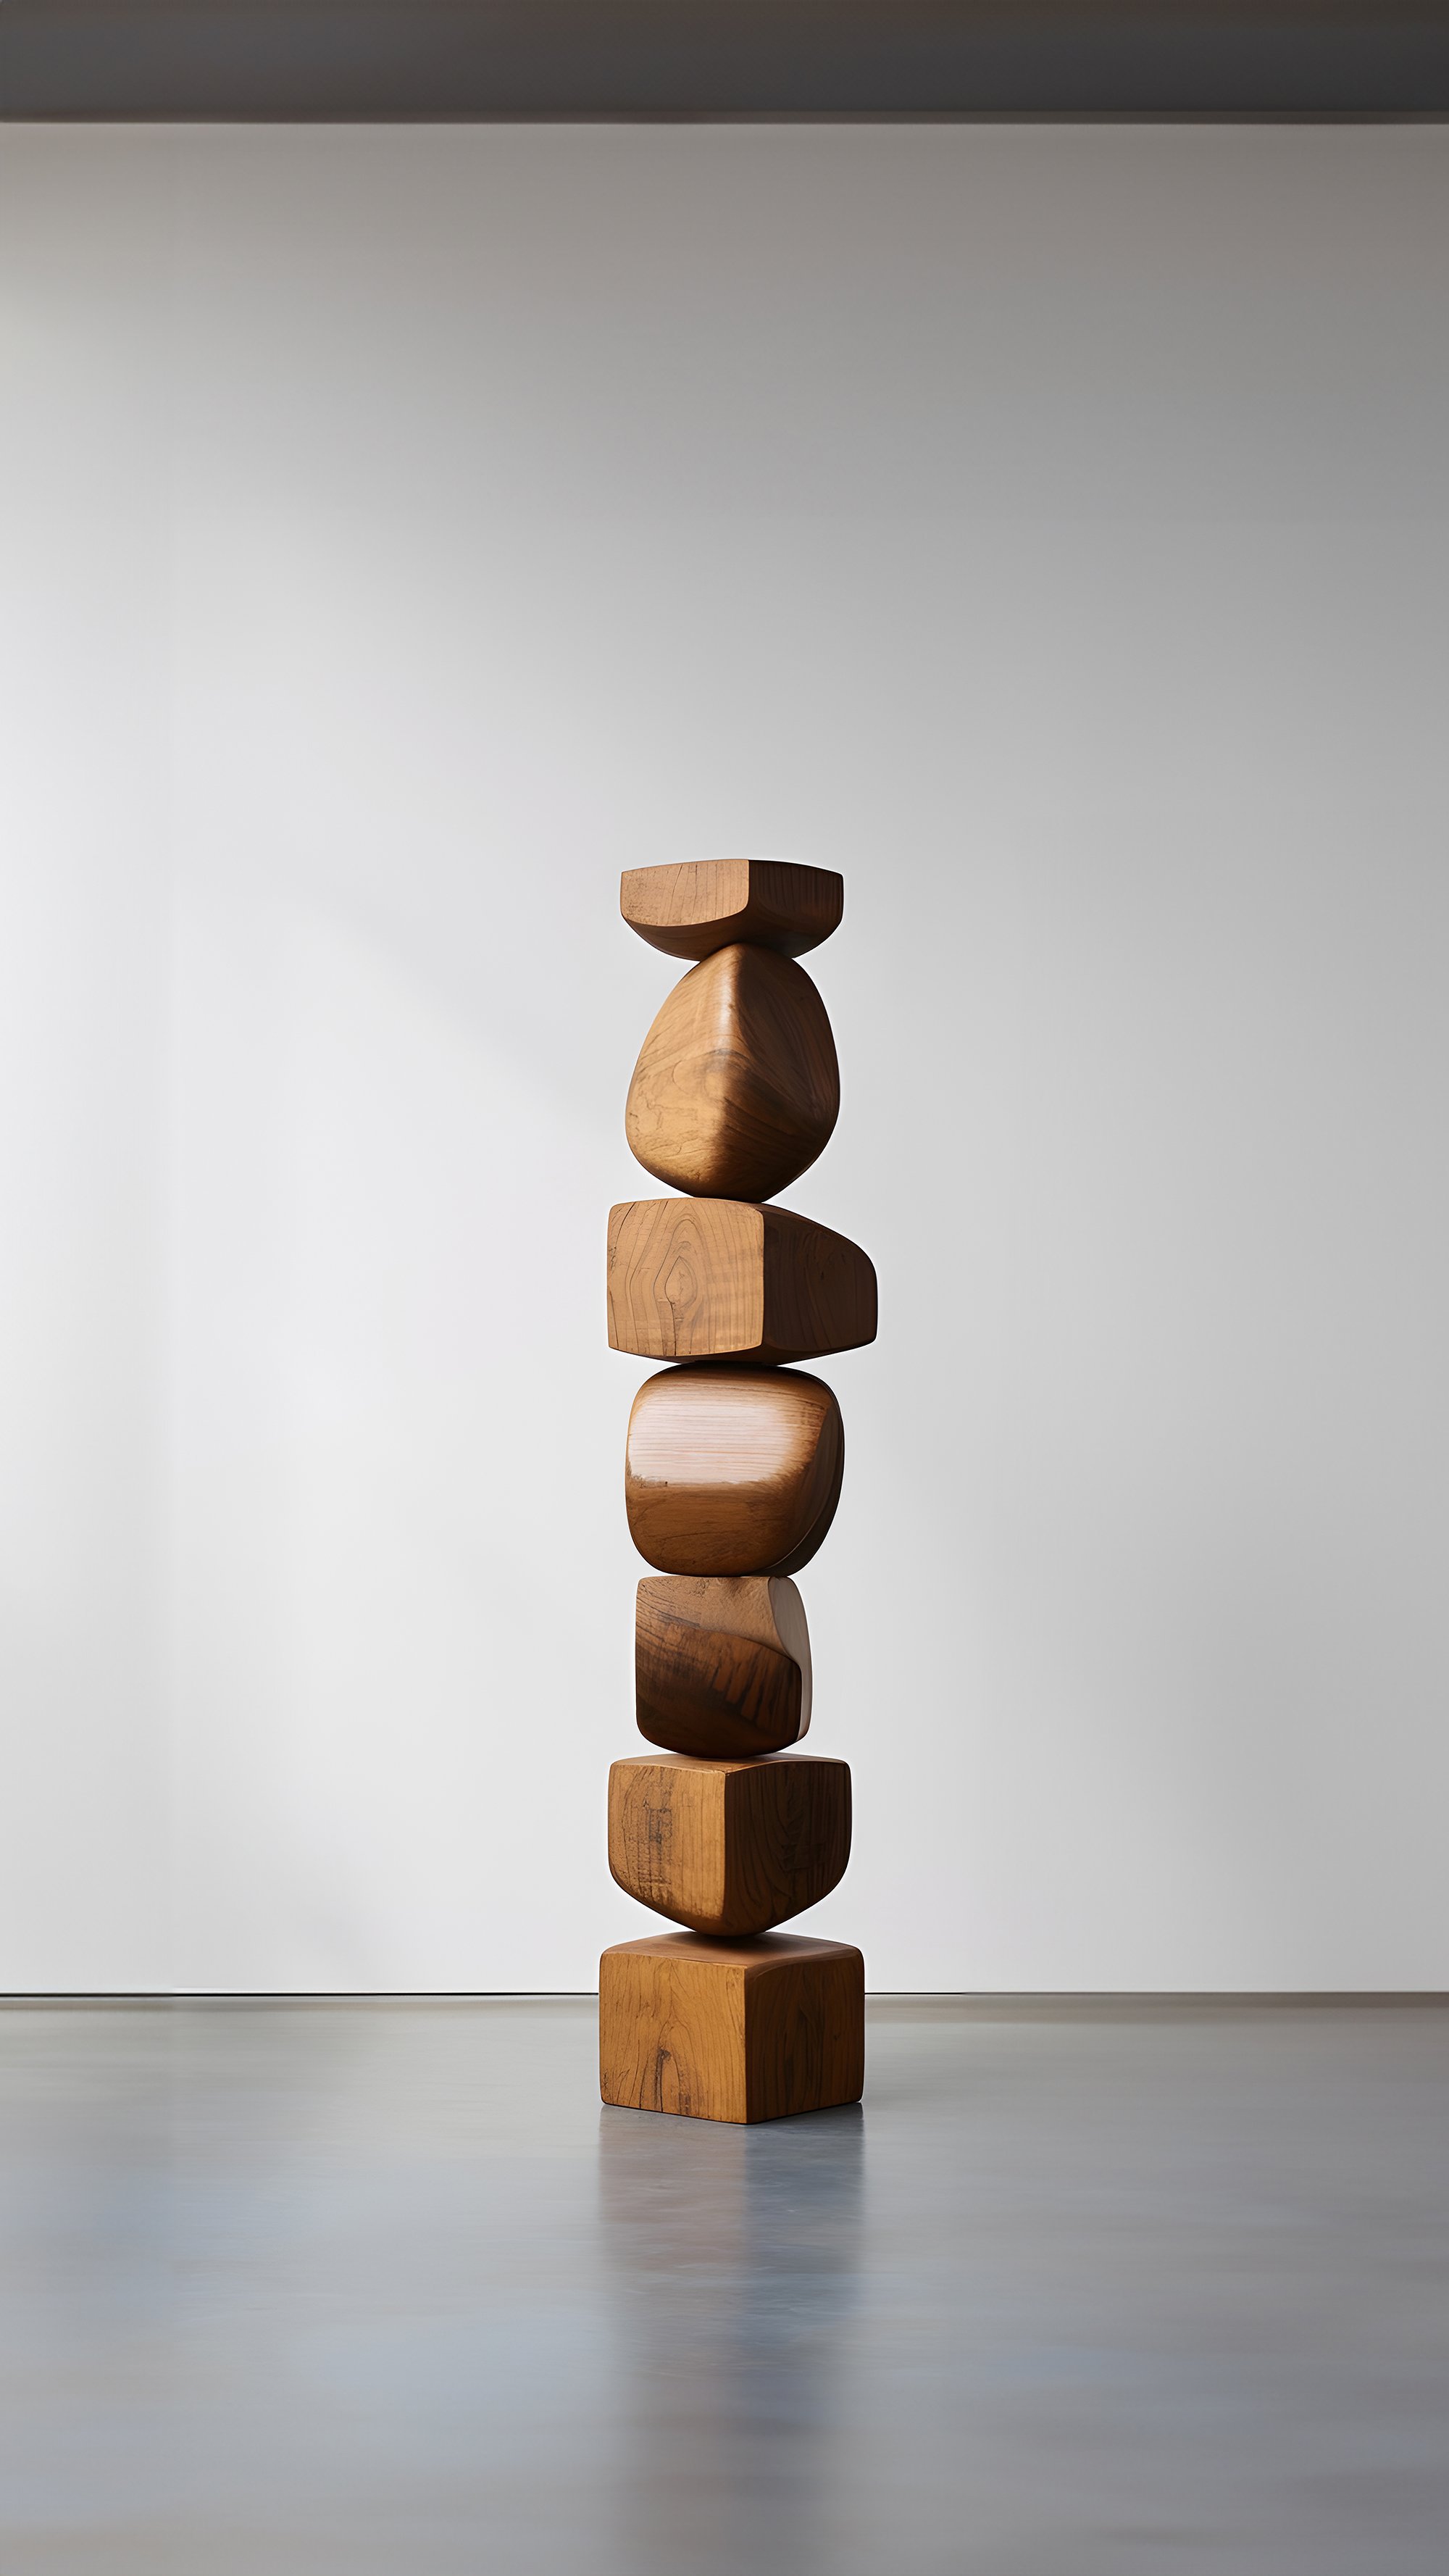 Carved Wooden Elegance Still Stand No72 Abstract Totem by Joel Escalona — 4.jpg